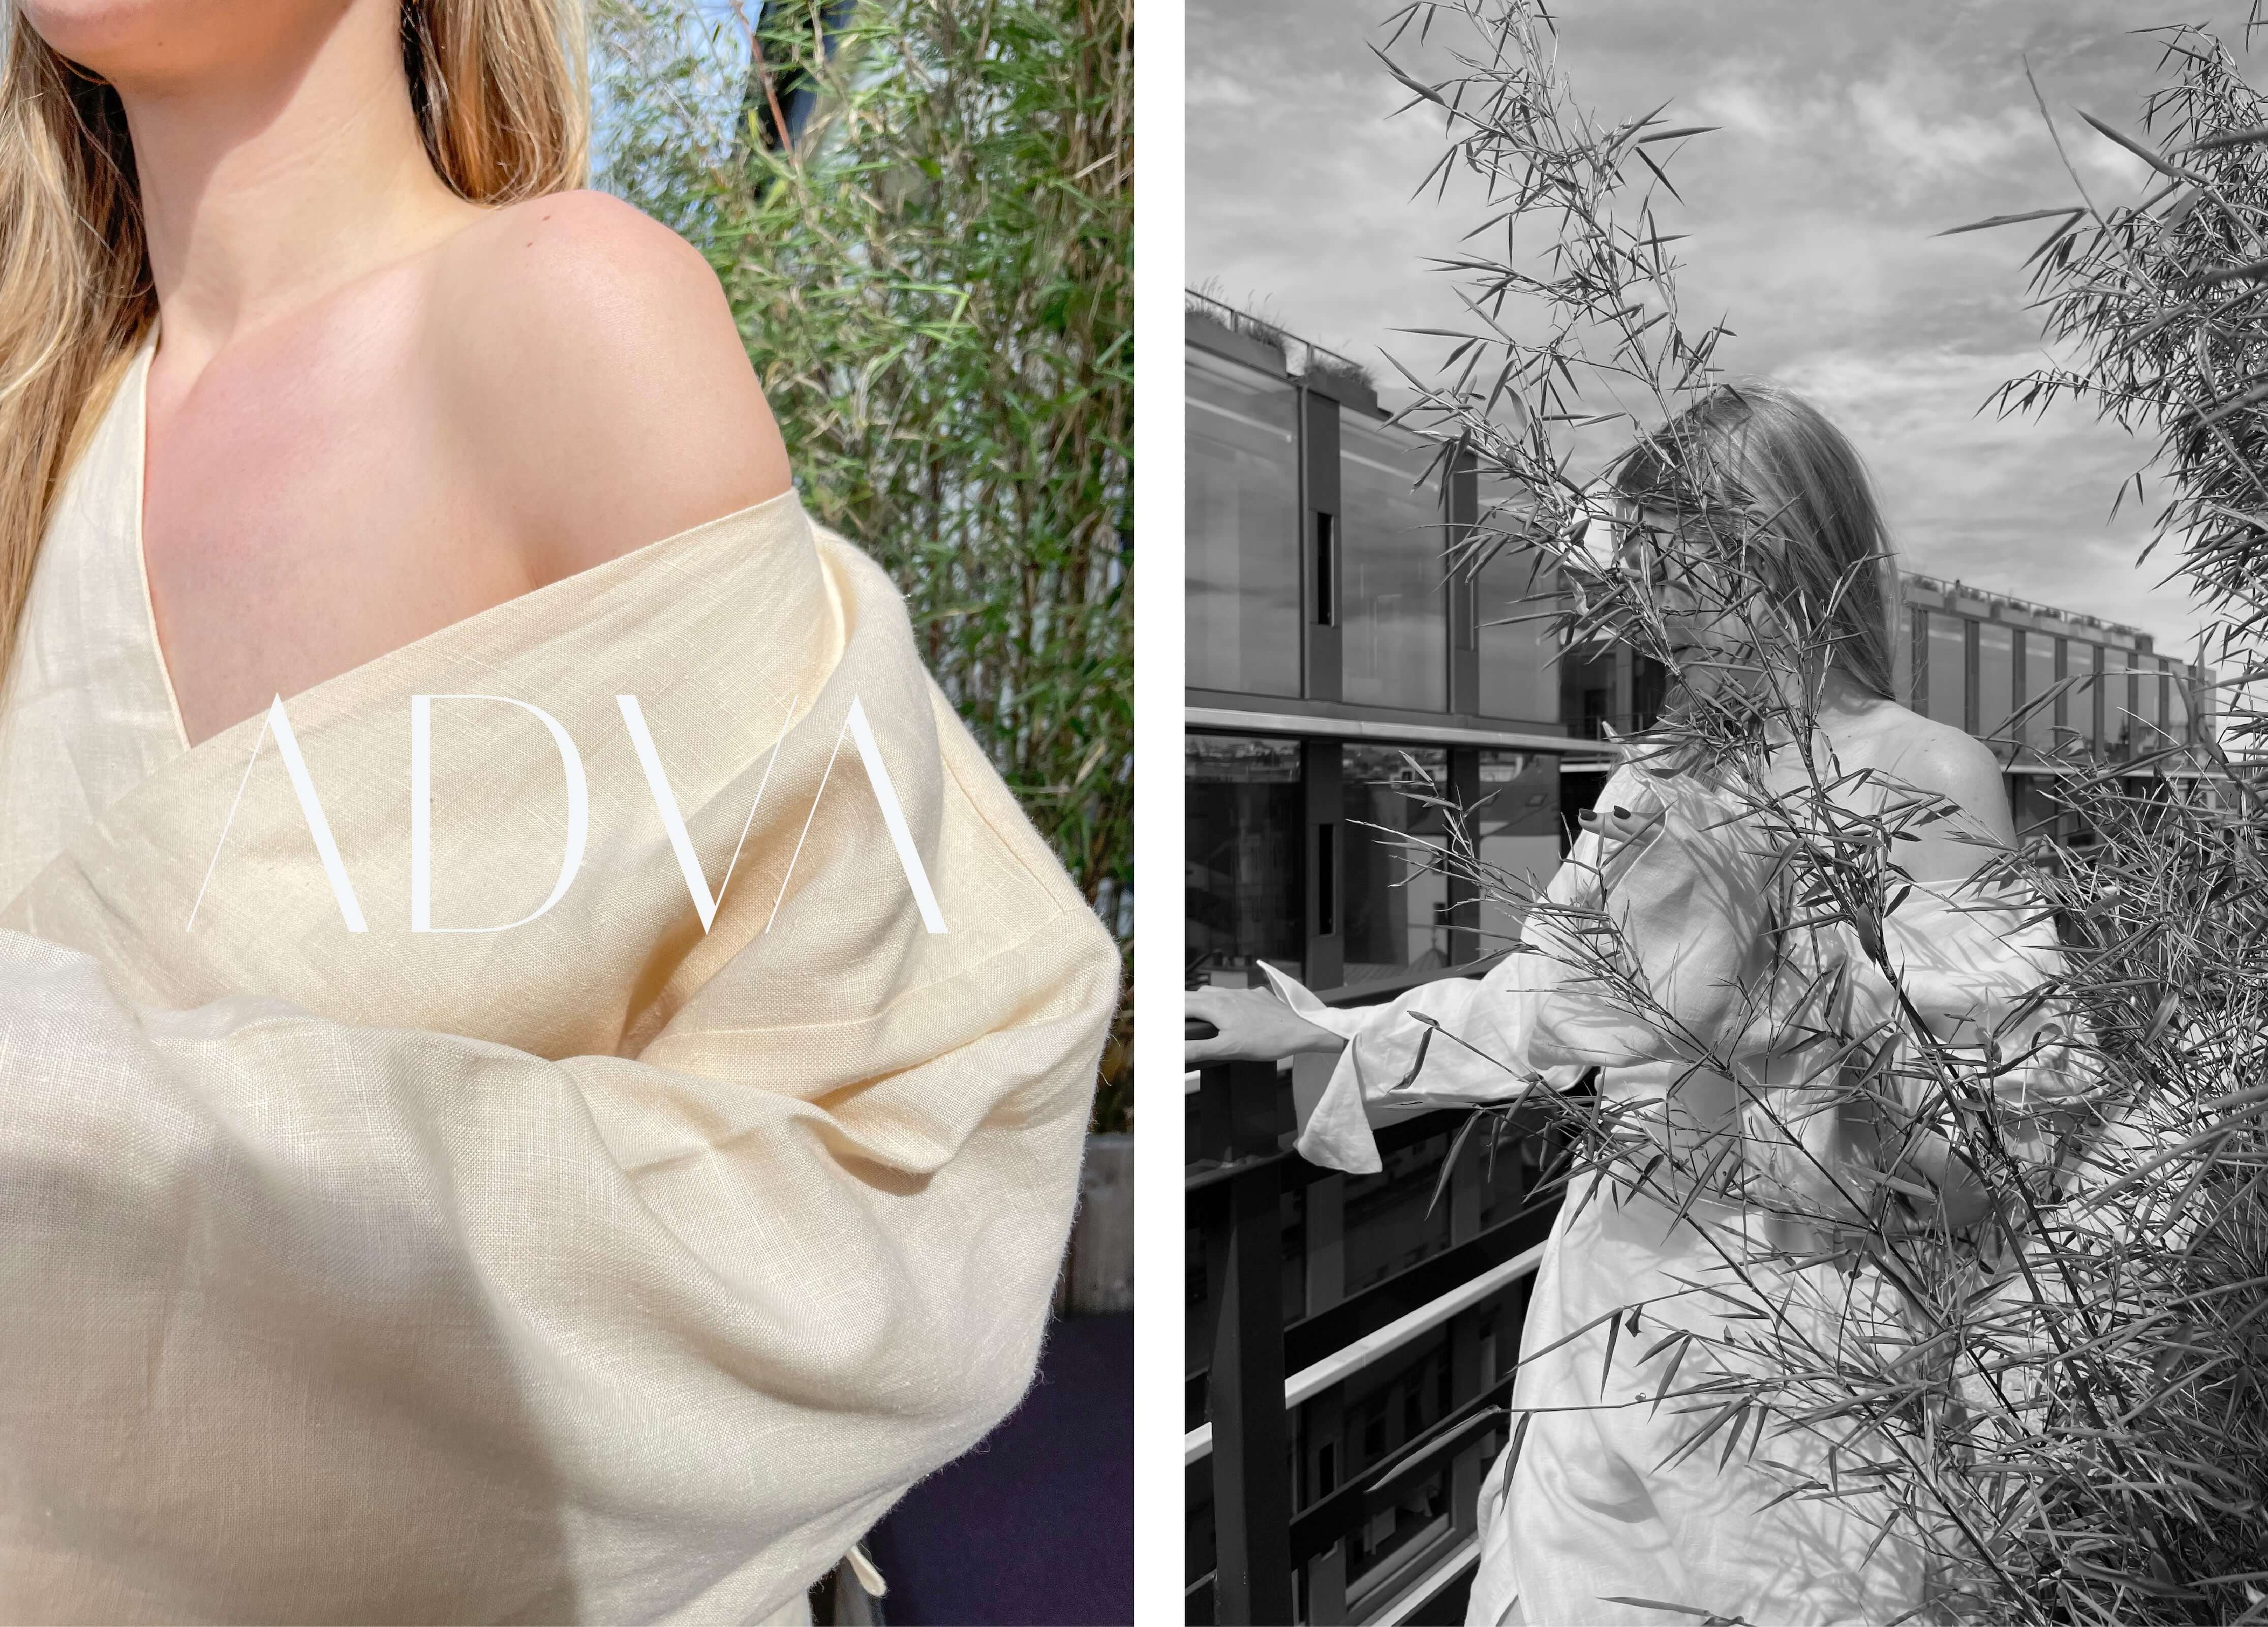 sustainable editorial, ethical brand, slow fashion brand, linen editorial, linen dress, adva, adva studios